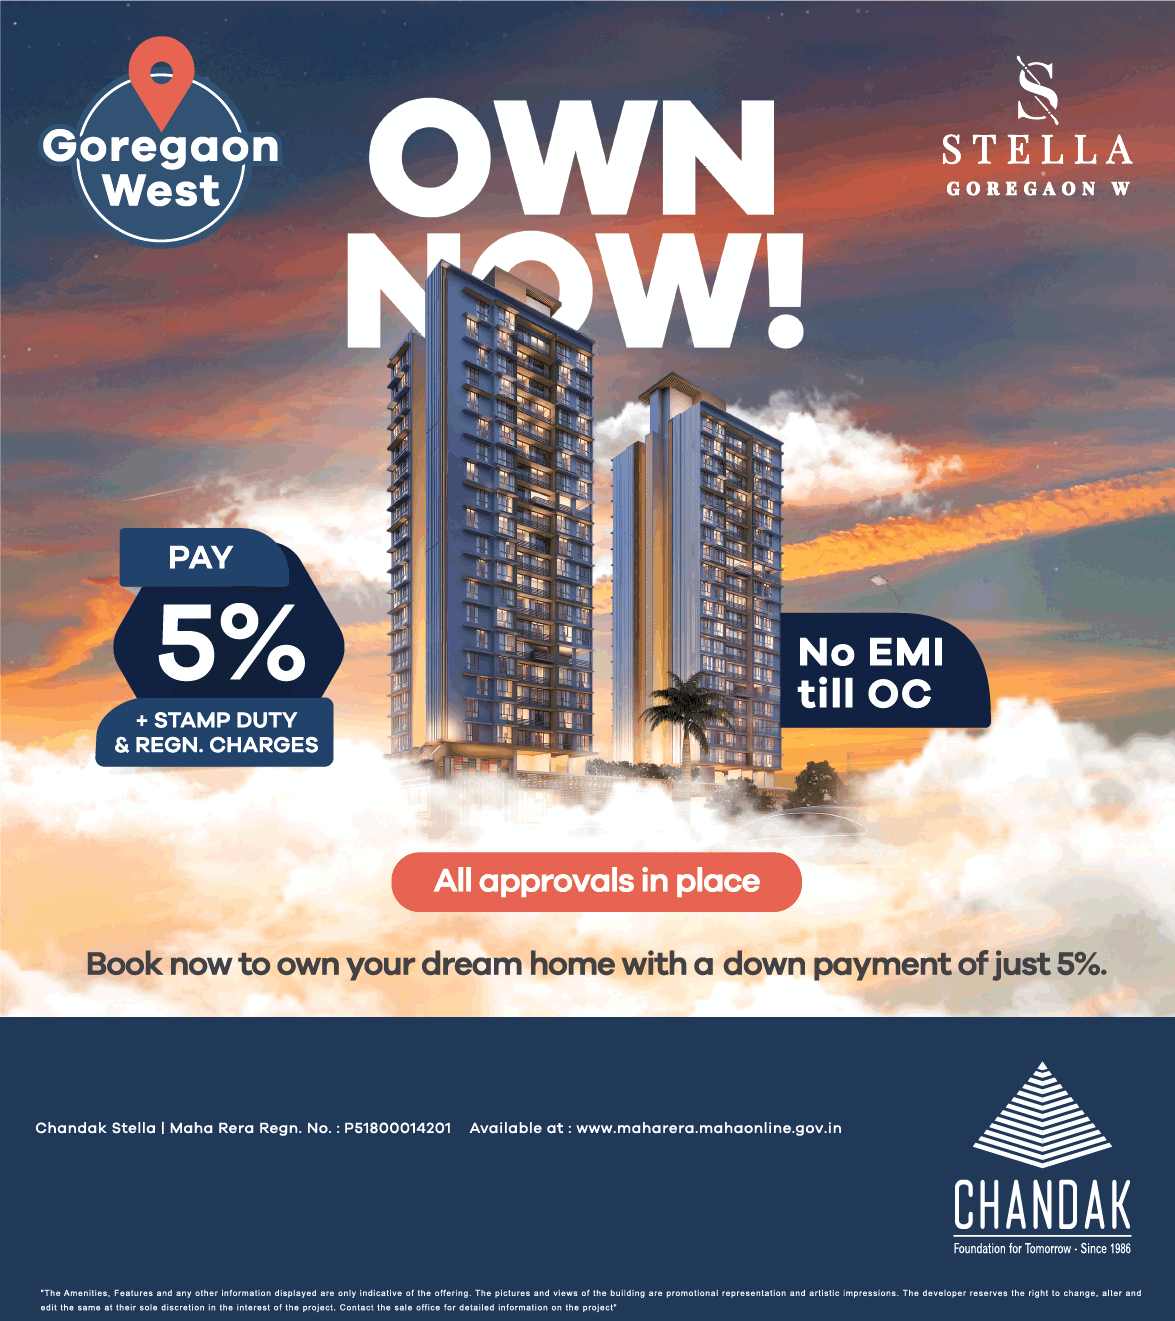 Book your dream home with a down payment of just 5% at Chandak Stella in Mumbai Update